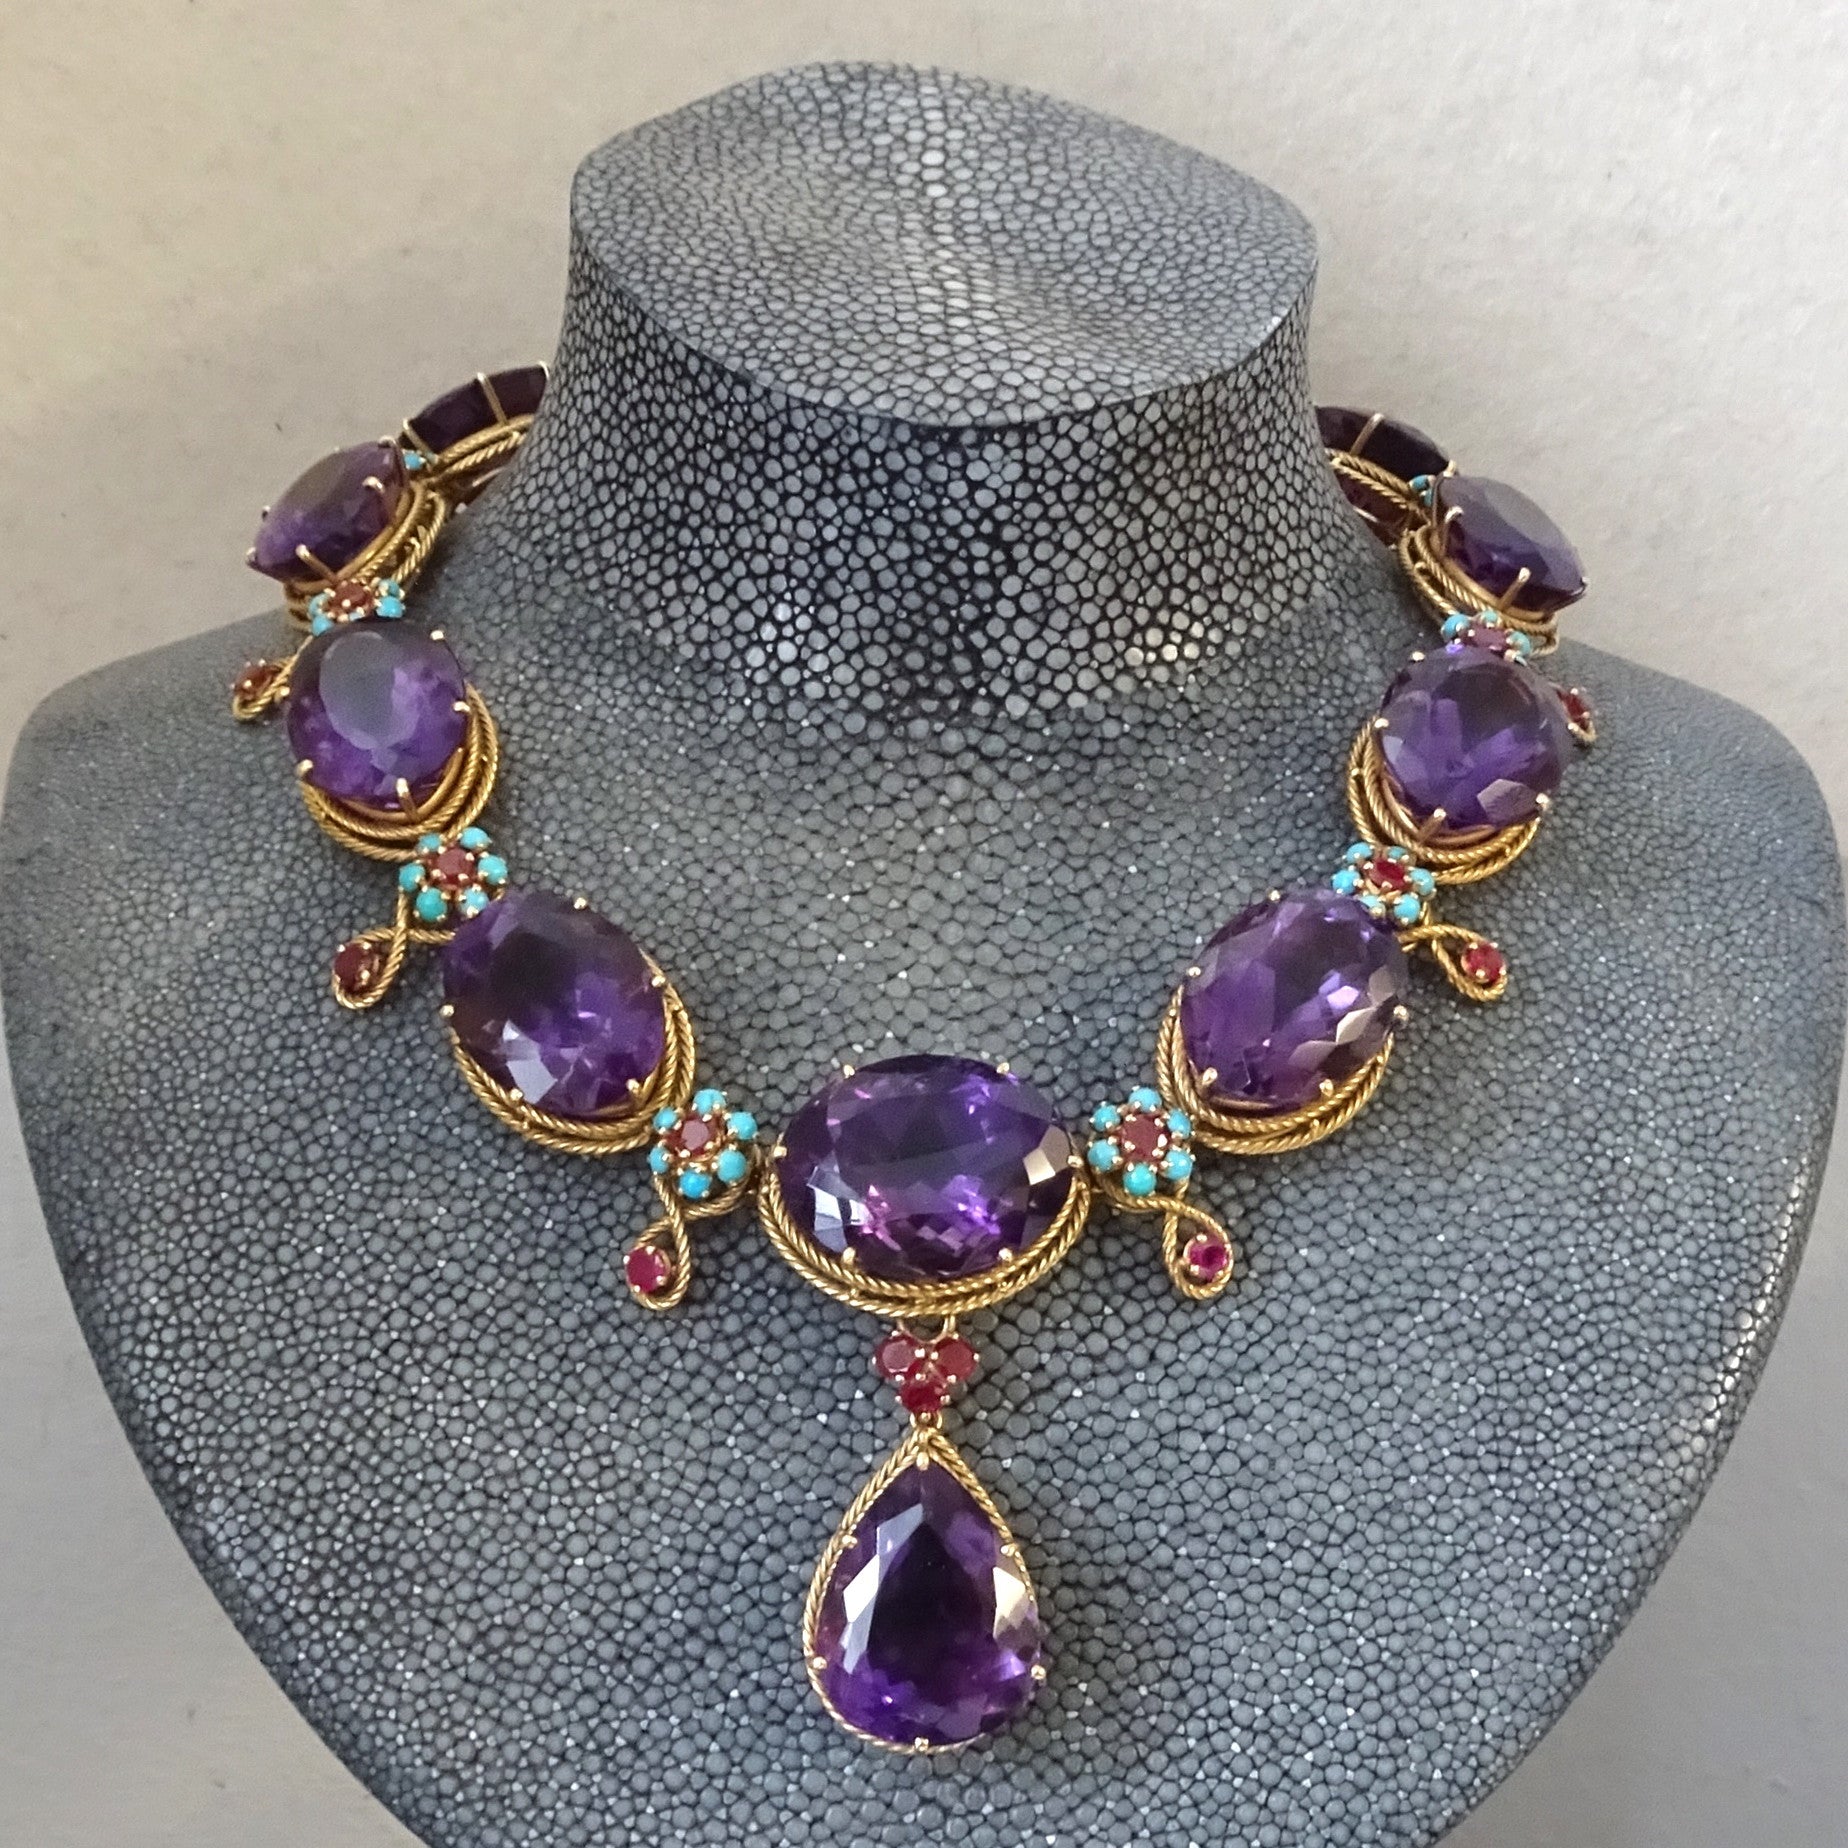 1960s 18KT Yellow Gold Amethyst, Ruby & Turquoise Necklace on form